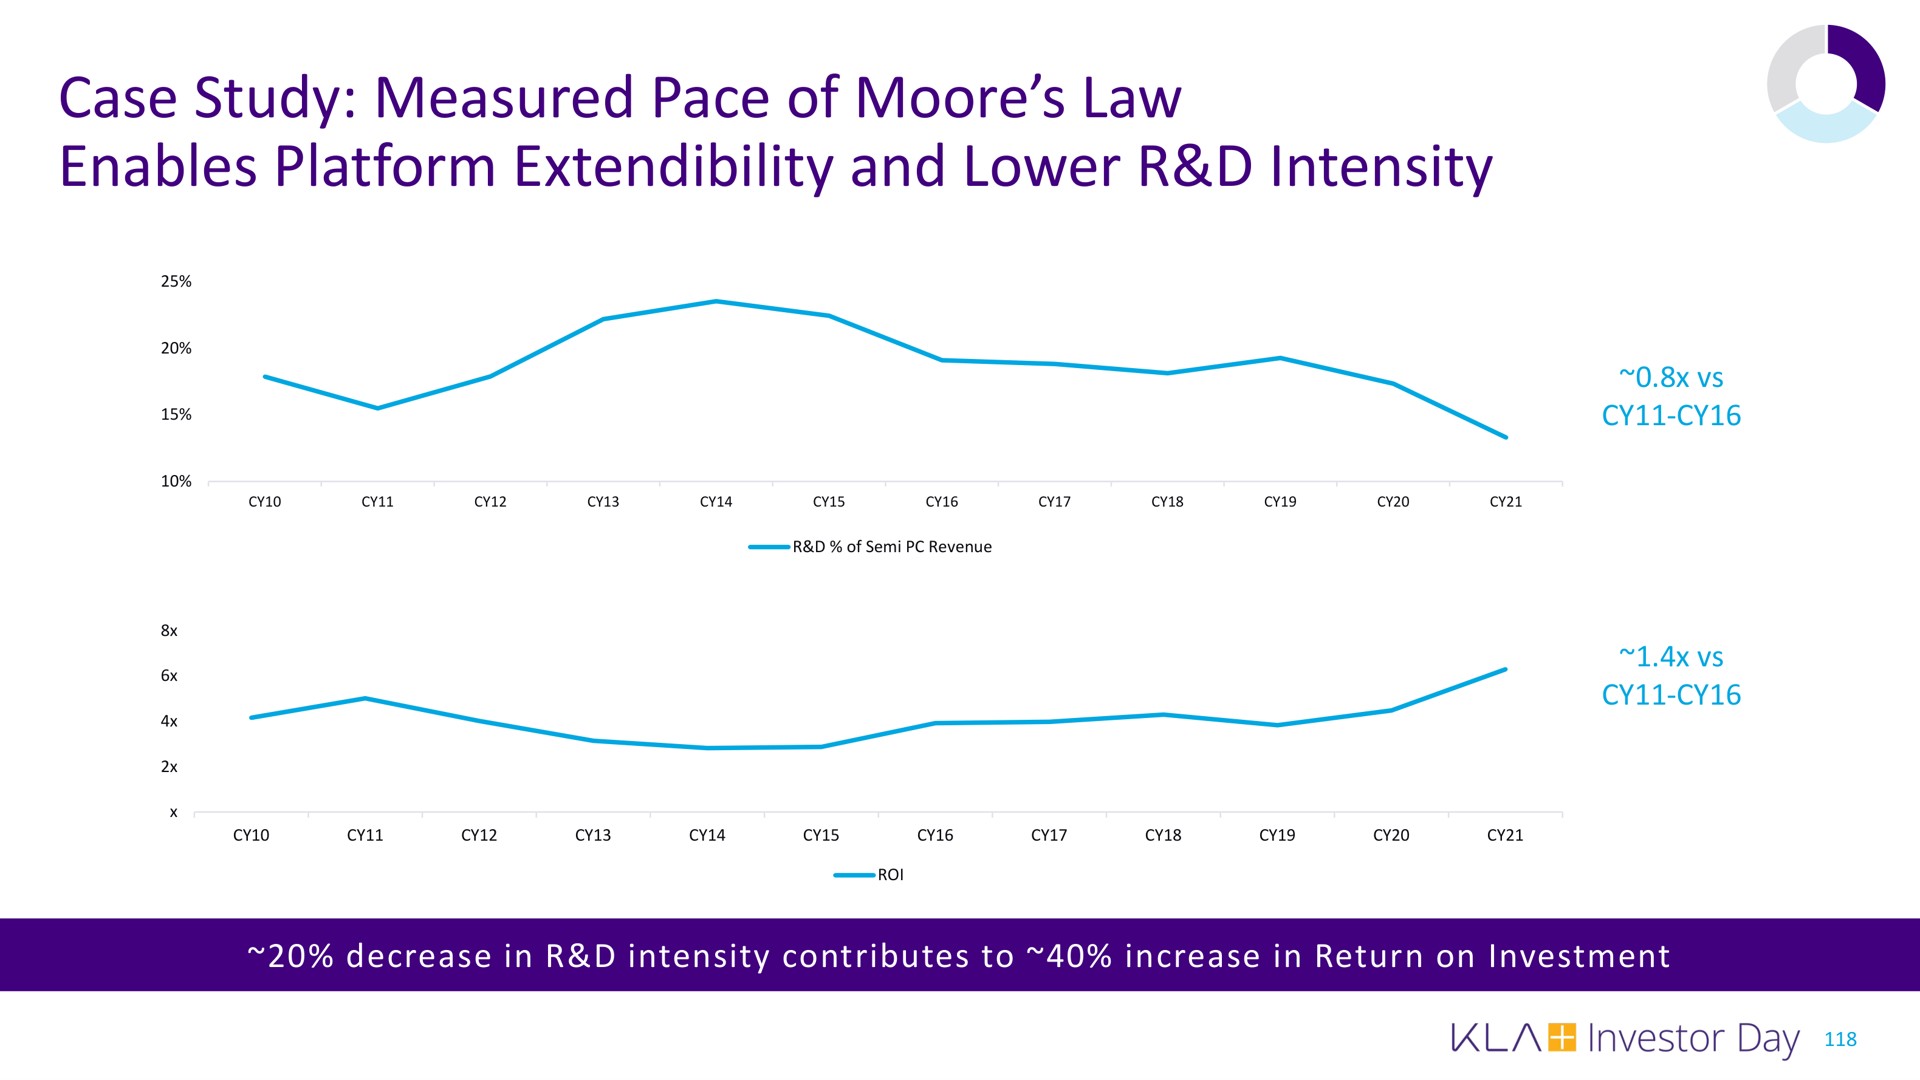 case study measured pace of law enables platform extendibility and lower intensity | KLA